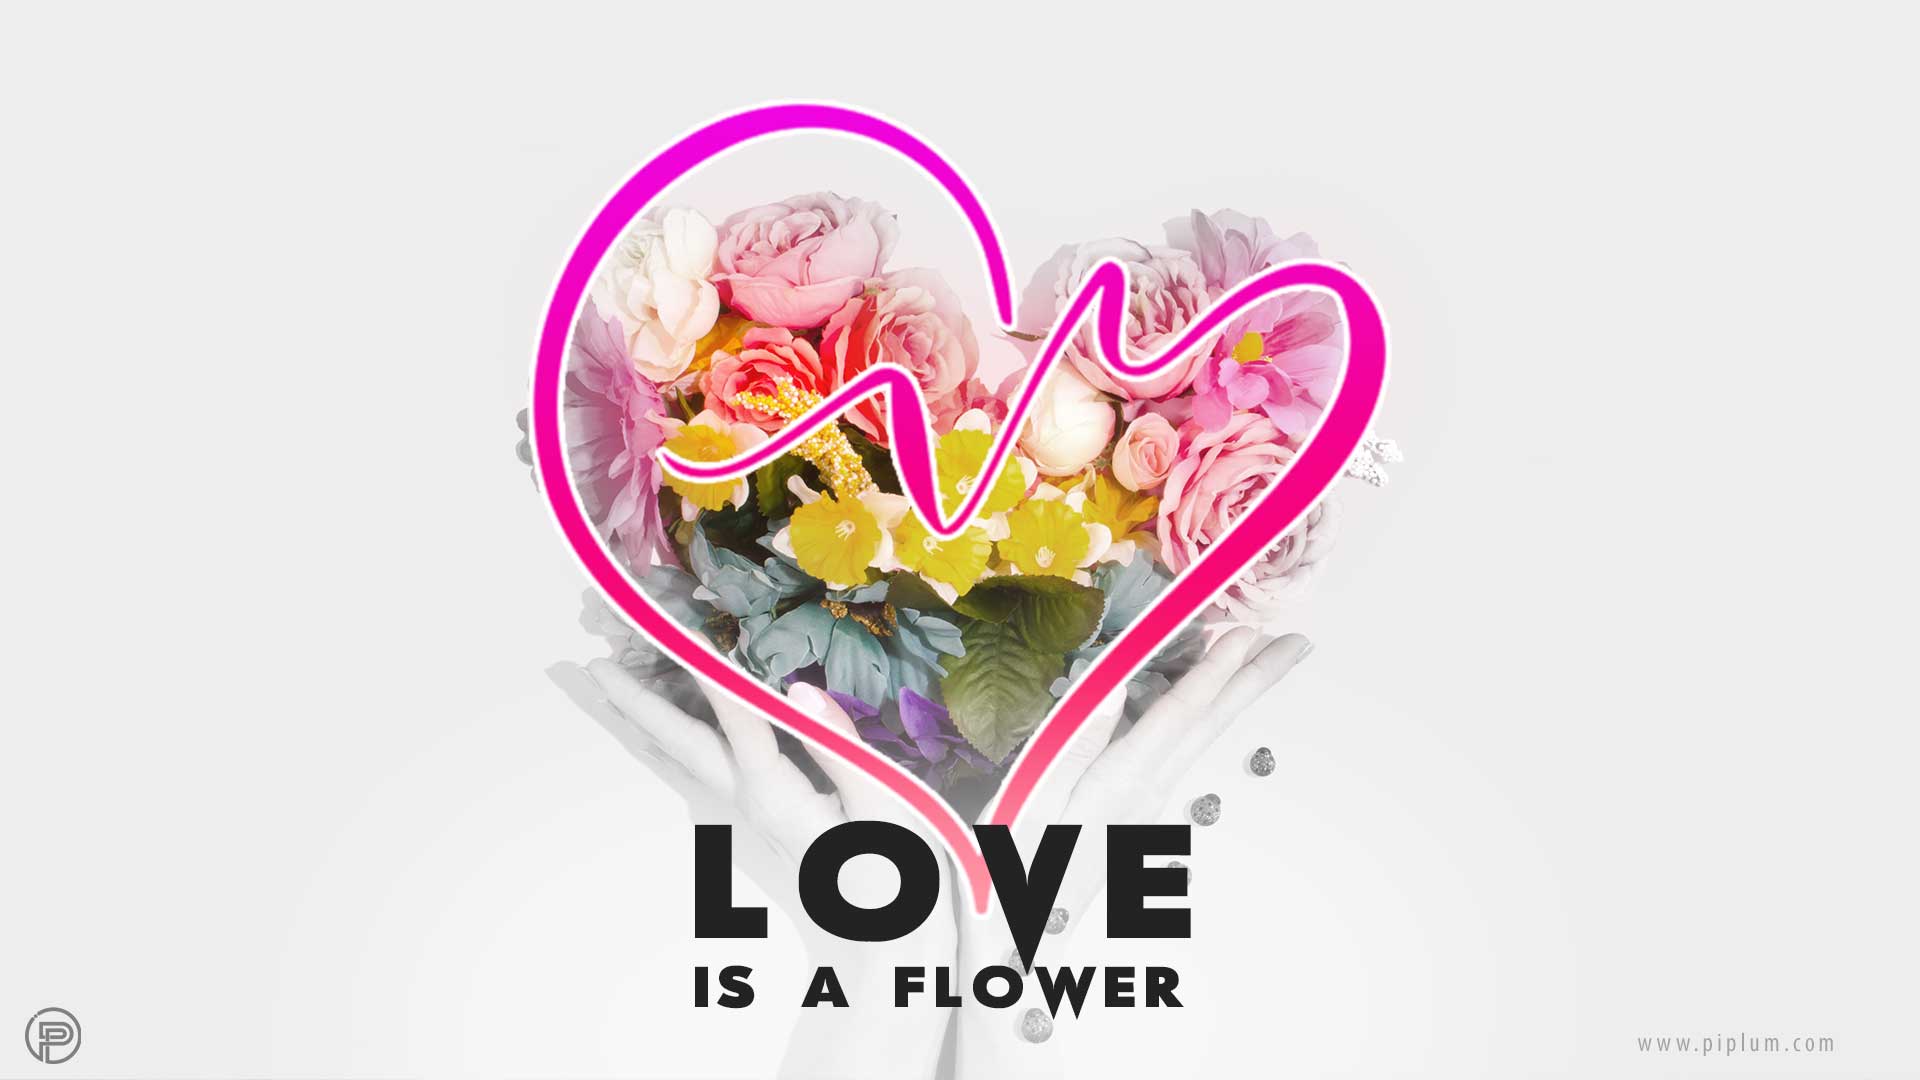 Love-Flower-quote-heart